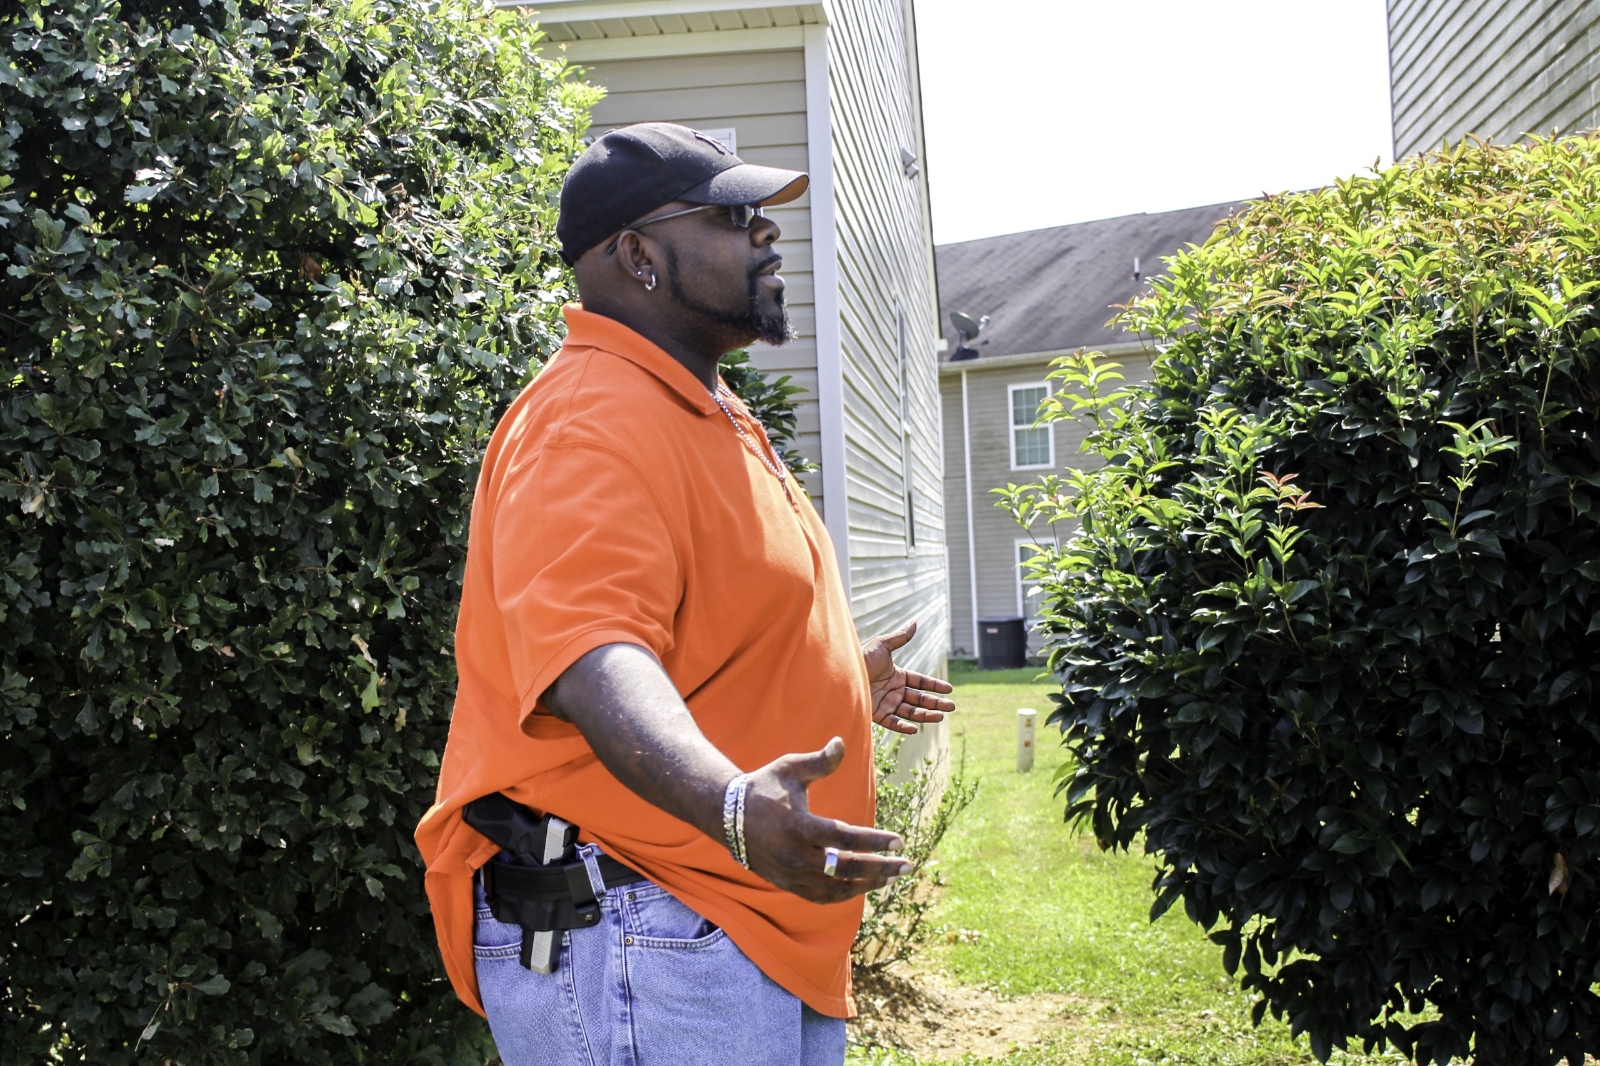 Luther Thompson, 41, poses with his firearm outside his Cartersville, Ga. home on Sept. 6, 2020.